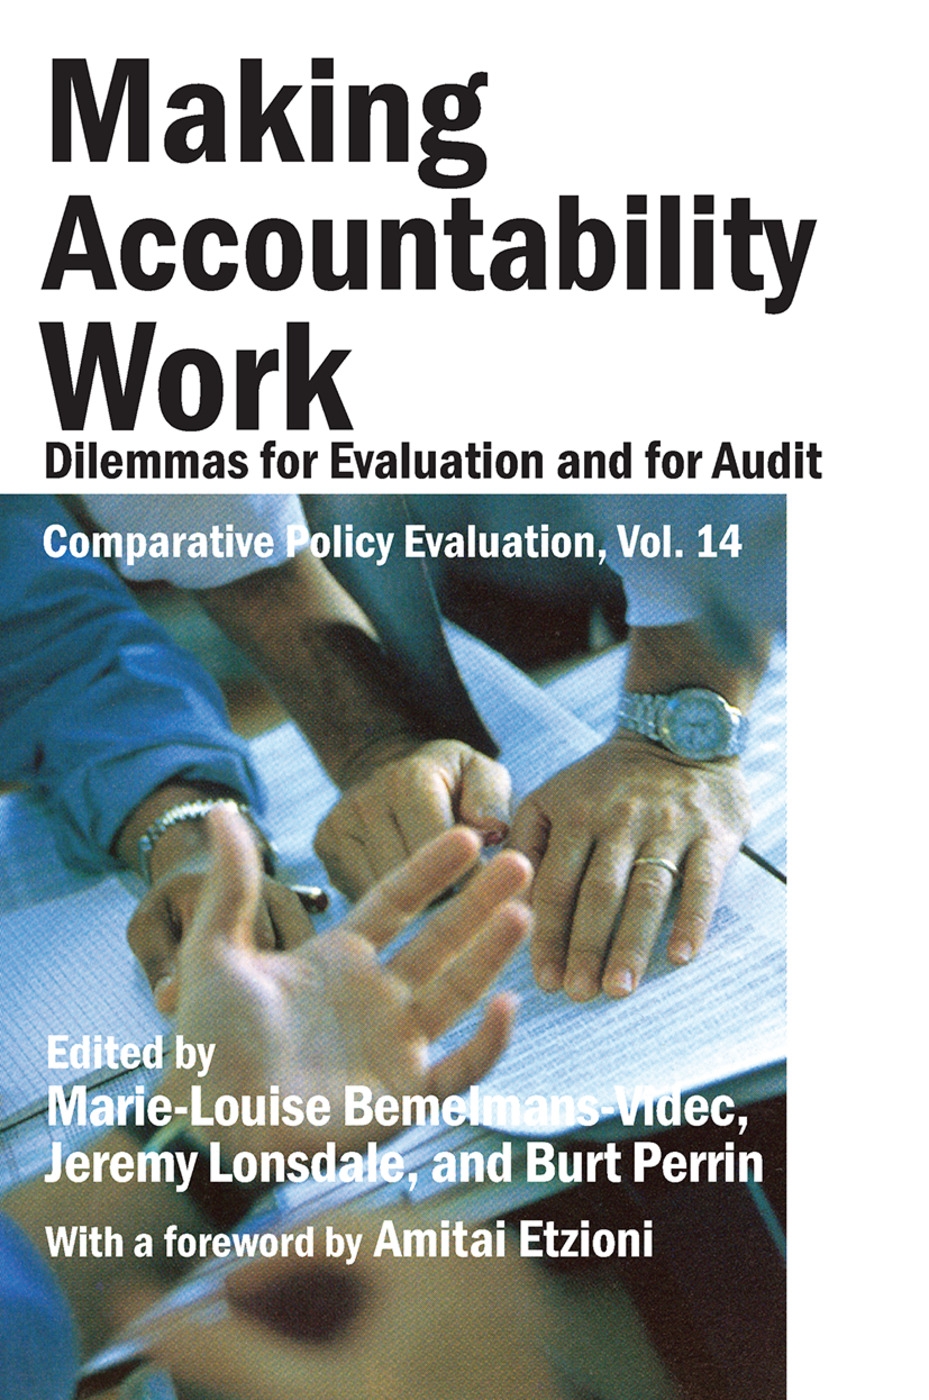 Making Accountability Work: Dilemmas for Evaluation and for Audit